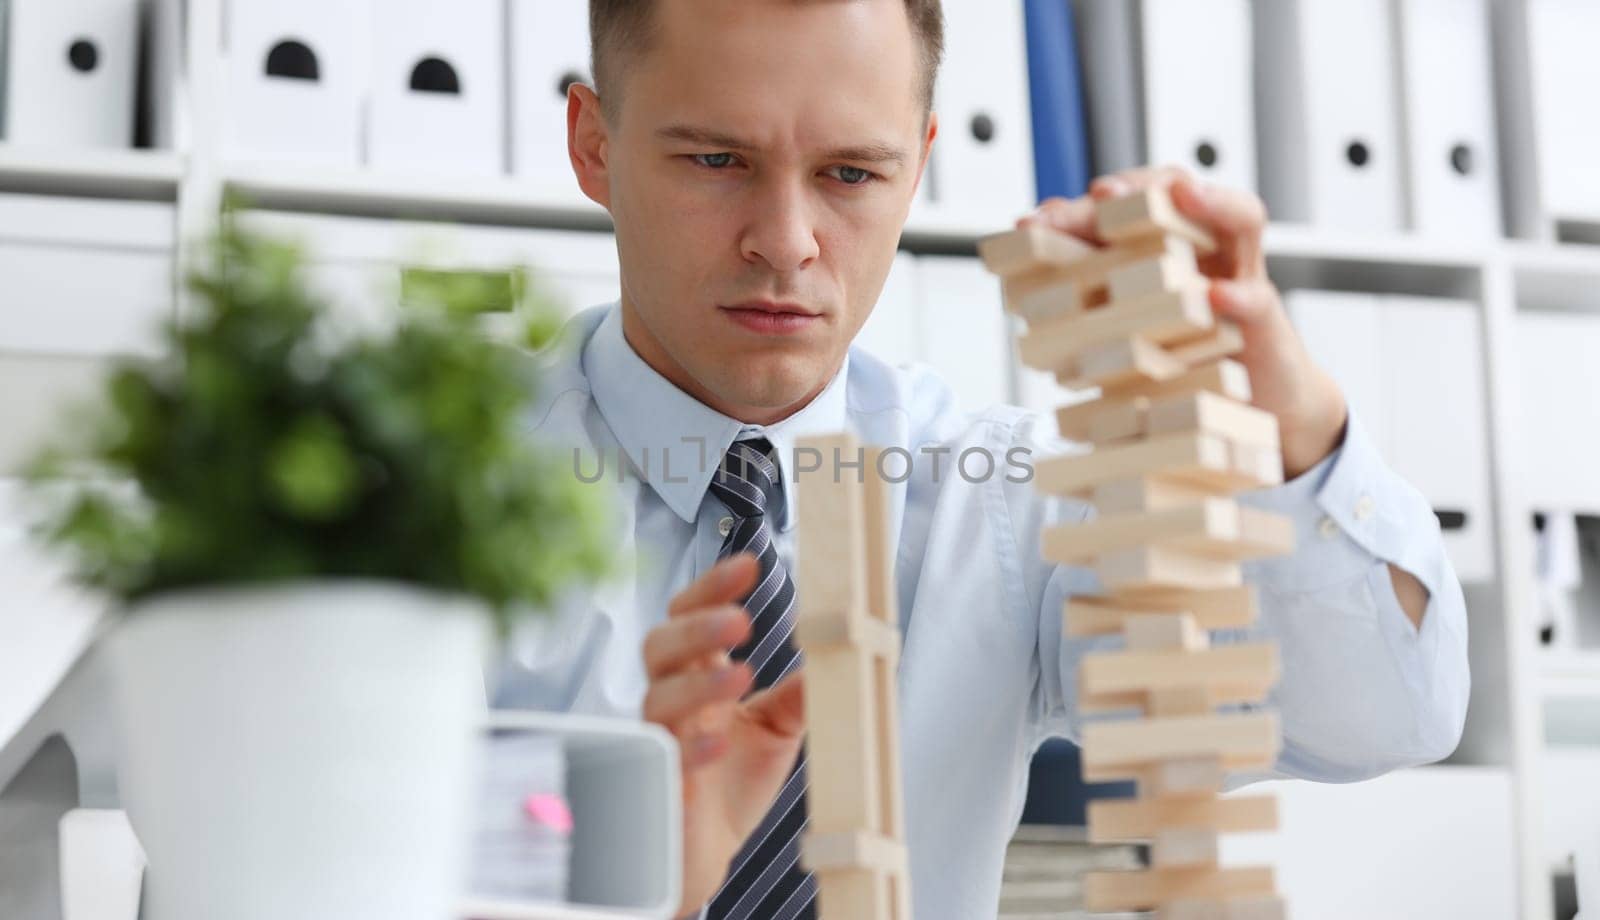 Businessman plays in strategy hand rearranging wooden blocks involved during break at work in office sitting table gaming pile fun joy pastime concept